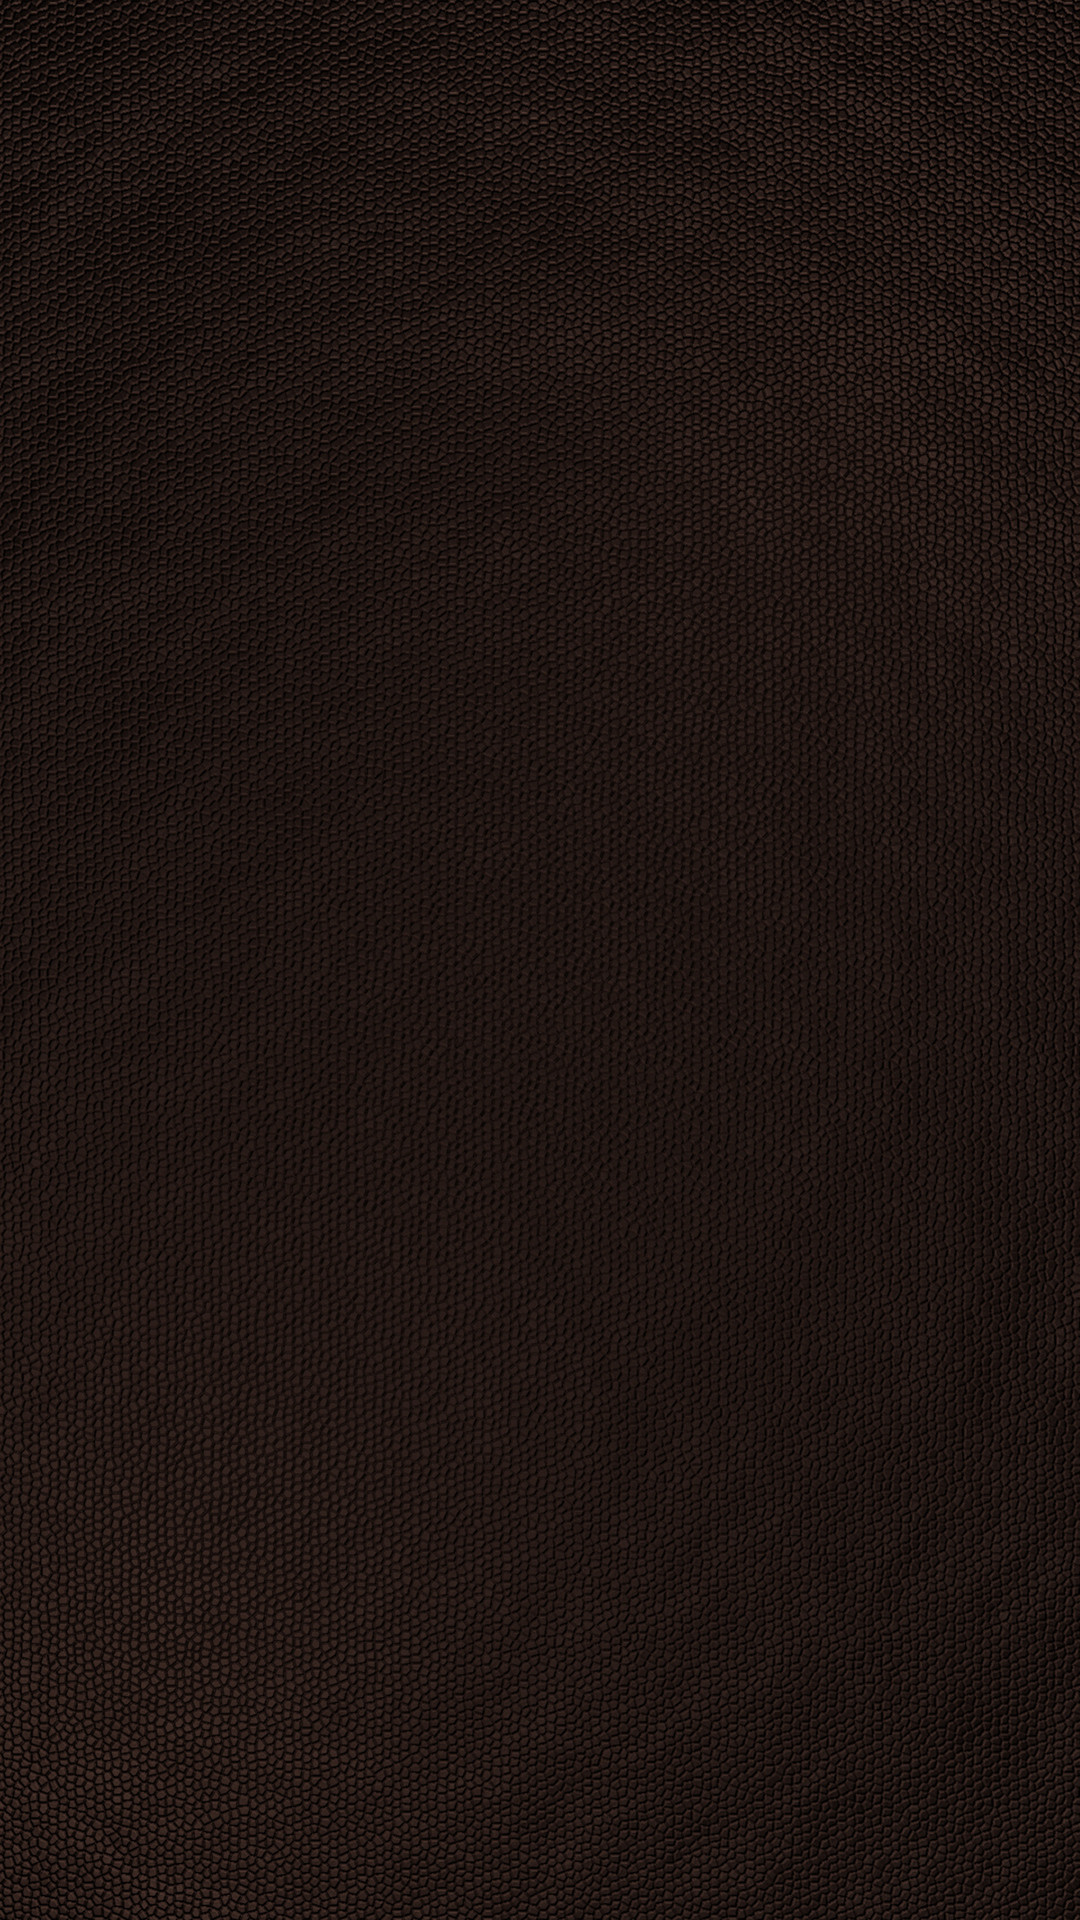 1080x1920 Brown leather Wallpaper